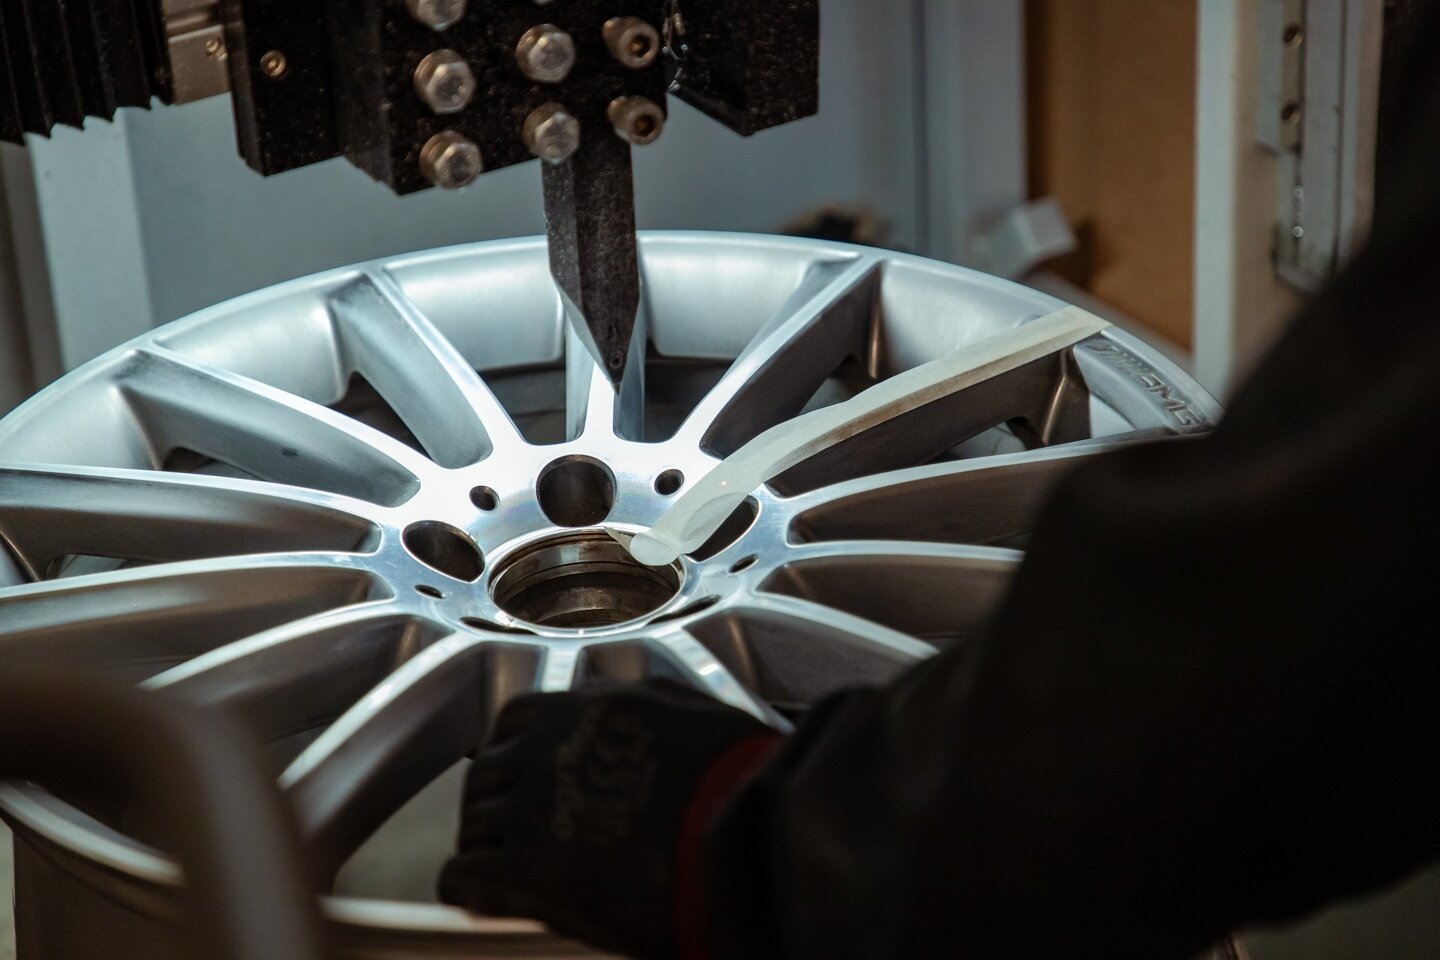 Do you need your wheels repairing? Contact us today for a quote 👀

📞01234 984577
✉️info@d3.services 
🖥️http://www.d3.services 

#wheel #wheelrefurbishment #wheelrefurb #alloyrefurb #bedfordwheelrefurb #diamondcut #diamondcutwheel #bedford #bedford